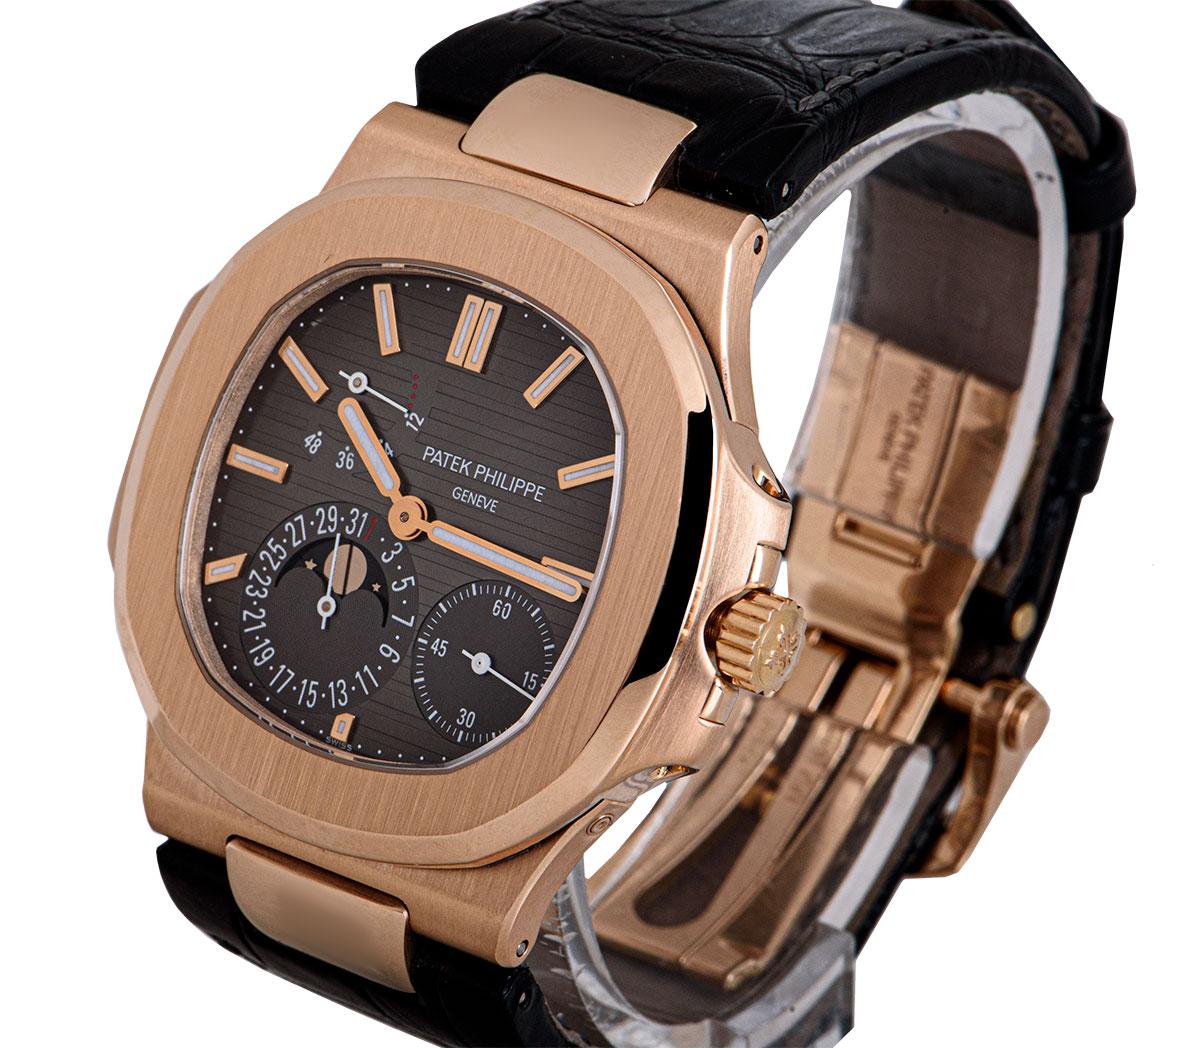 A 40 mm 18k Rose Gold Nautilus Gents Wristwatch, black brown dial with applied hour markers, small seconds between 3 and 6 0'clock, date with moonphase display at 7 0'clock, power reserve indicator between 9 and 12 0'clock, a fixed 18k rose gold